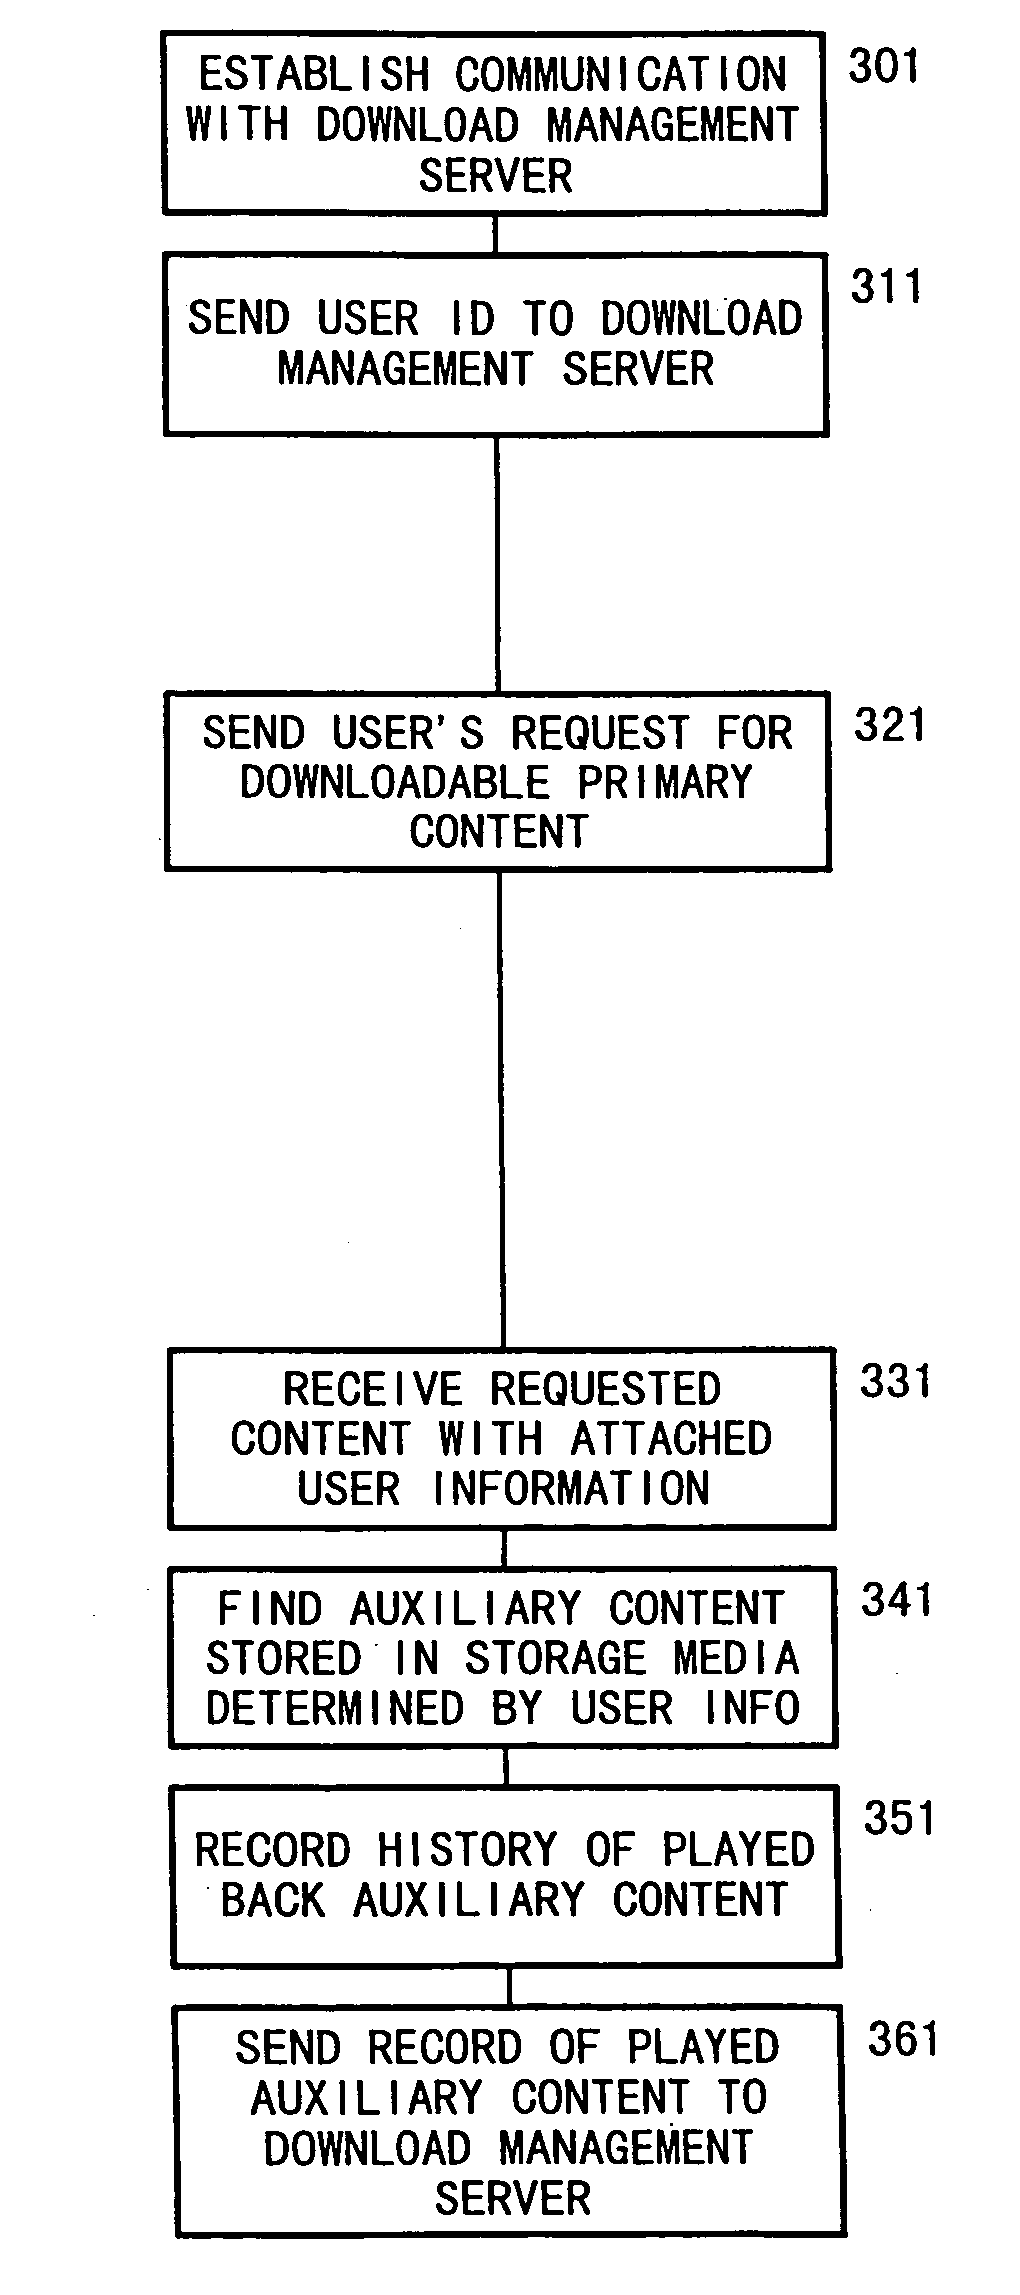 Method and system for enabling optional customer election of auxiliary content provided on detachable local storage media during access of primary content over a network and for collecting data concerning viewed auxiliary content